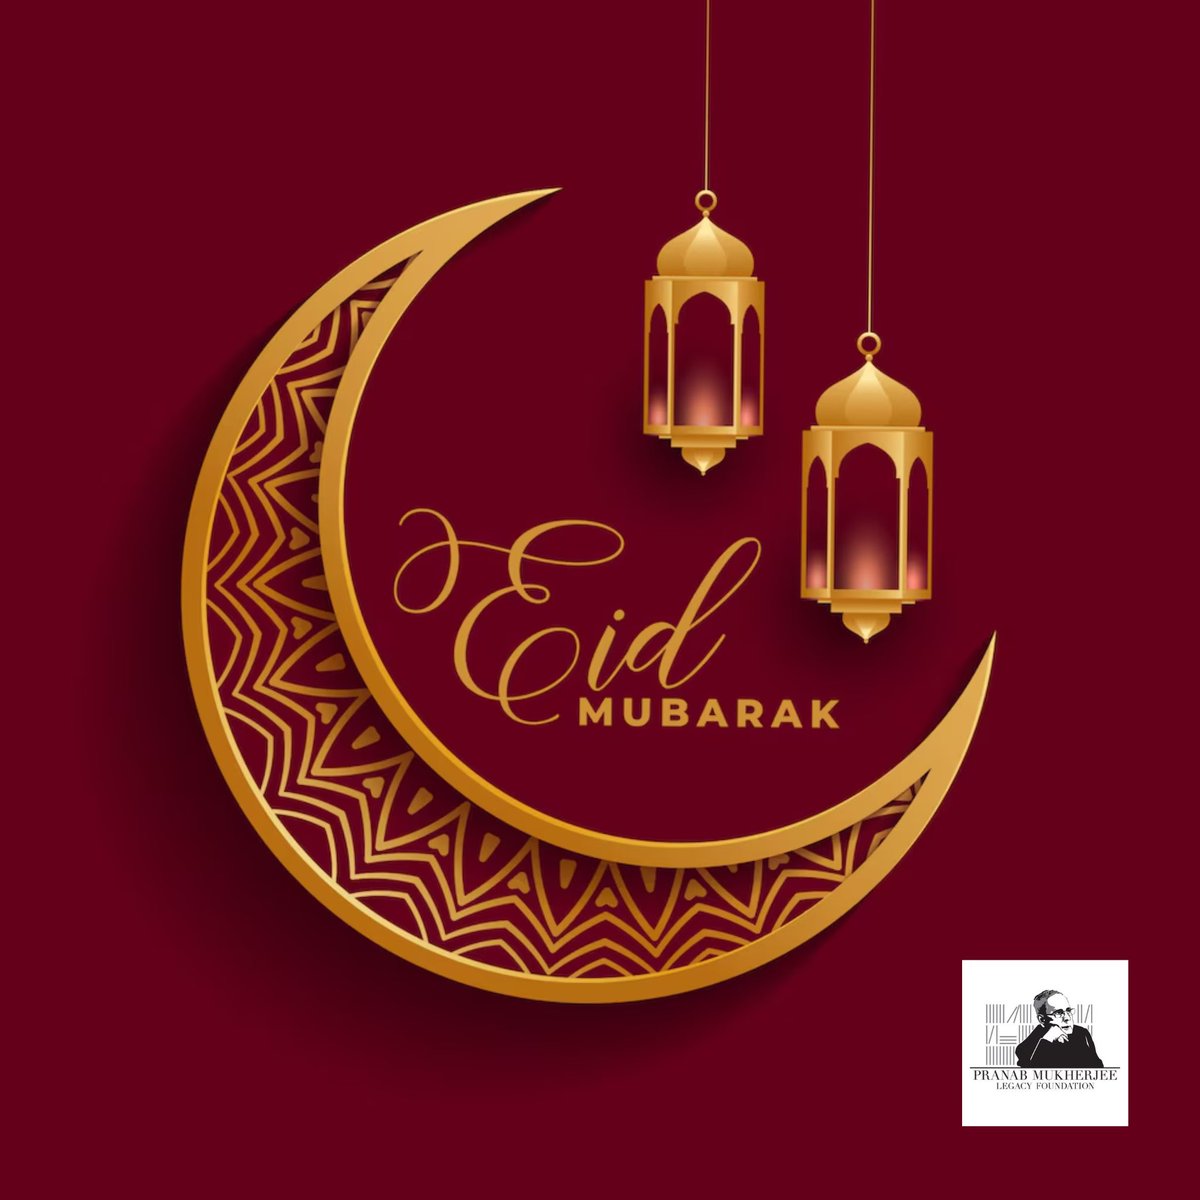 Greetings to all fellow citizens, particularly my Muslim brothers & sisters, in India & abroad on Eid-Ul-Fitr. May this joyous occasion bring happiness, peace and prosperity and be an opportunity to rededicate ourselves to serve humanity. #EidMubarak